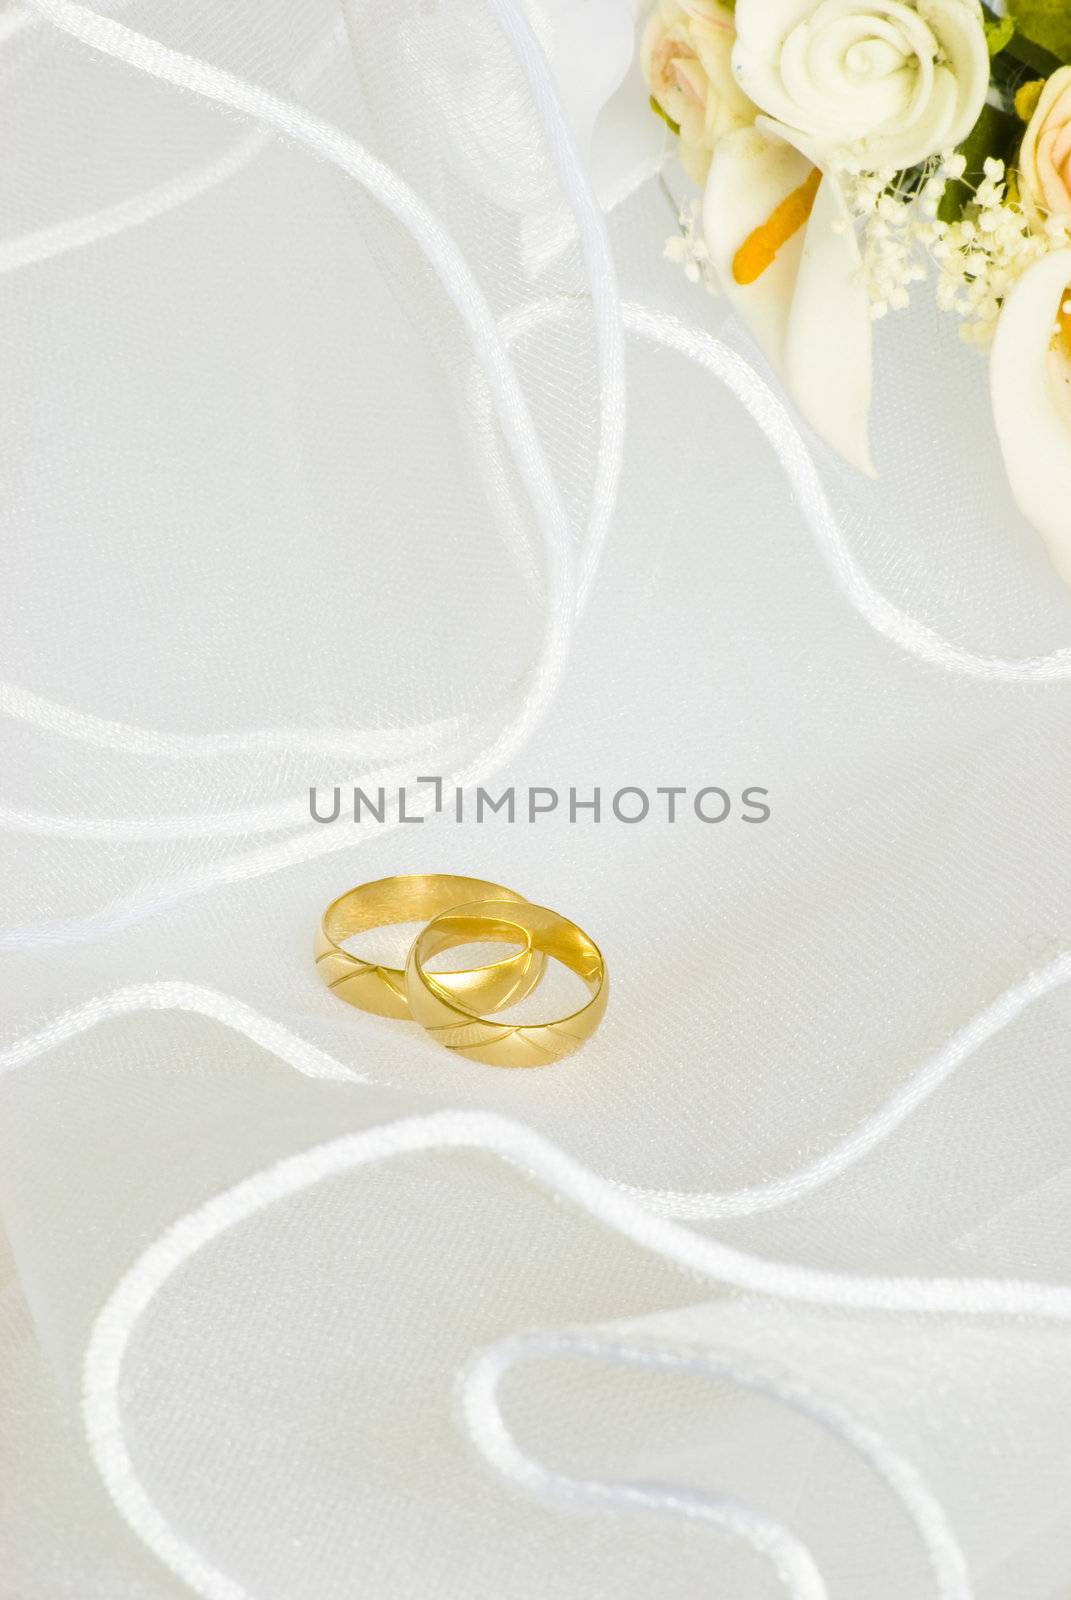 wedding rings and flowers decorations over bridal veil